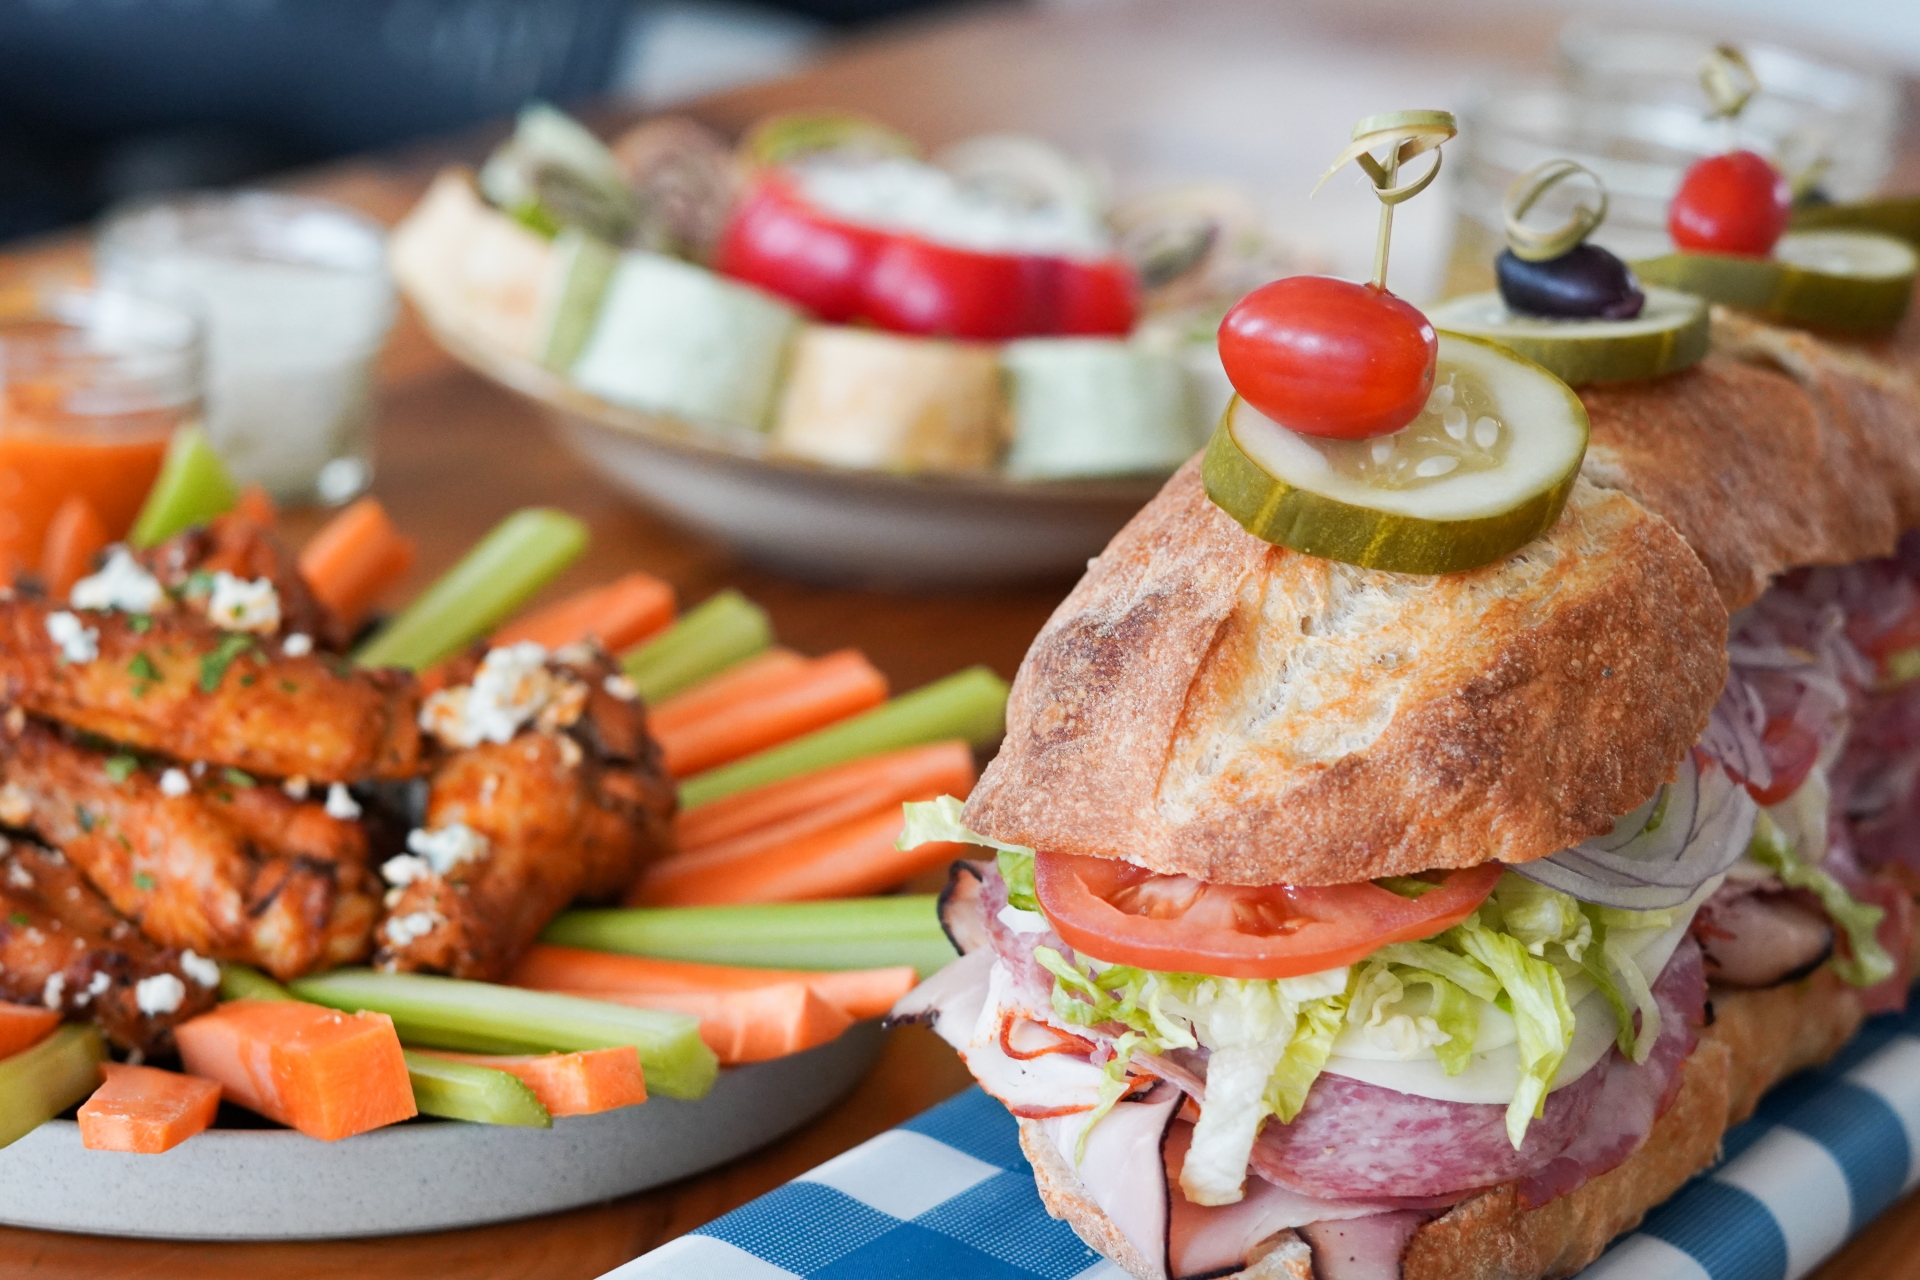 Several party foods are arrayed on a wooden table. In the foreground, a large sub sandwich on a crusty sub roll has sliced deli meats, shredded lettuce and a tomato slice peeking out the end. To the left, buffalo wings with blue cheese crumble sit at the center of a platter, surrounded by carrot and celery sticks. In the background, an additional platter holds sliced sandwich pinwheels and veggies.